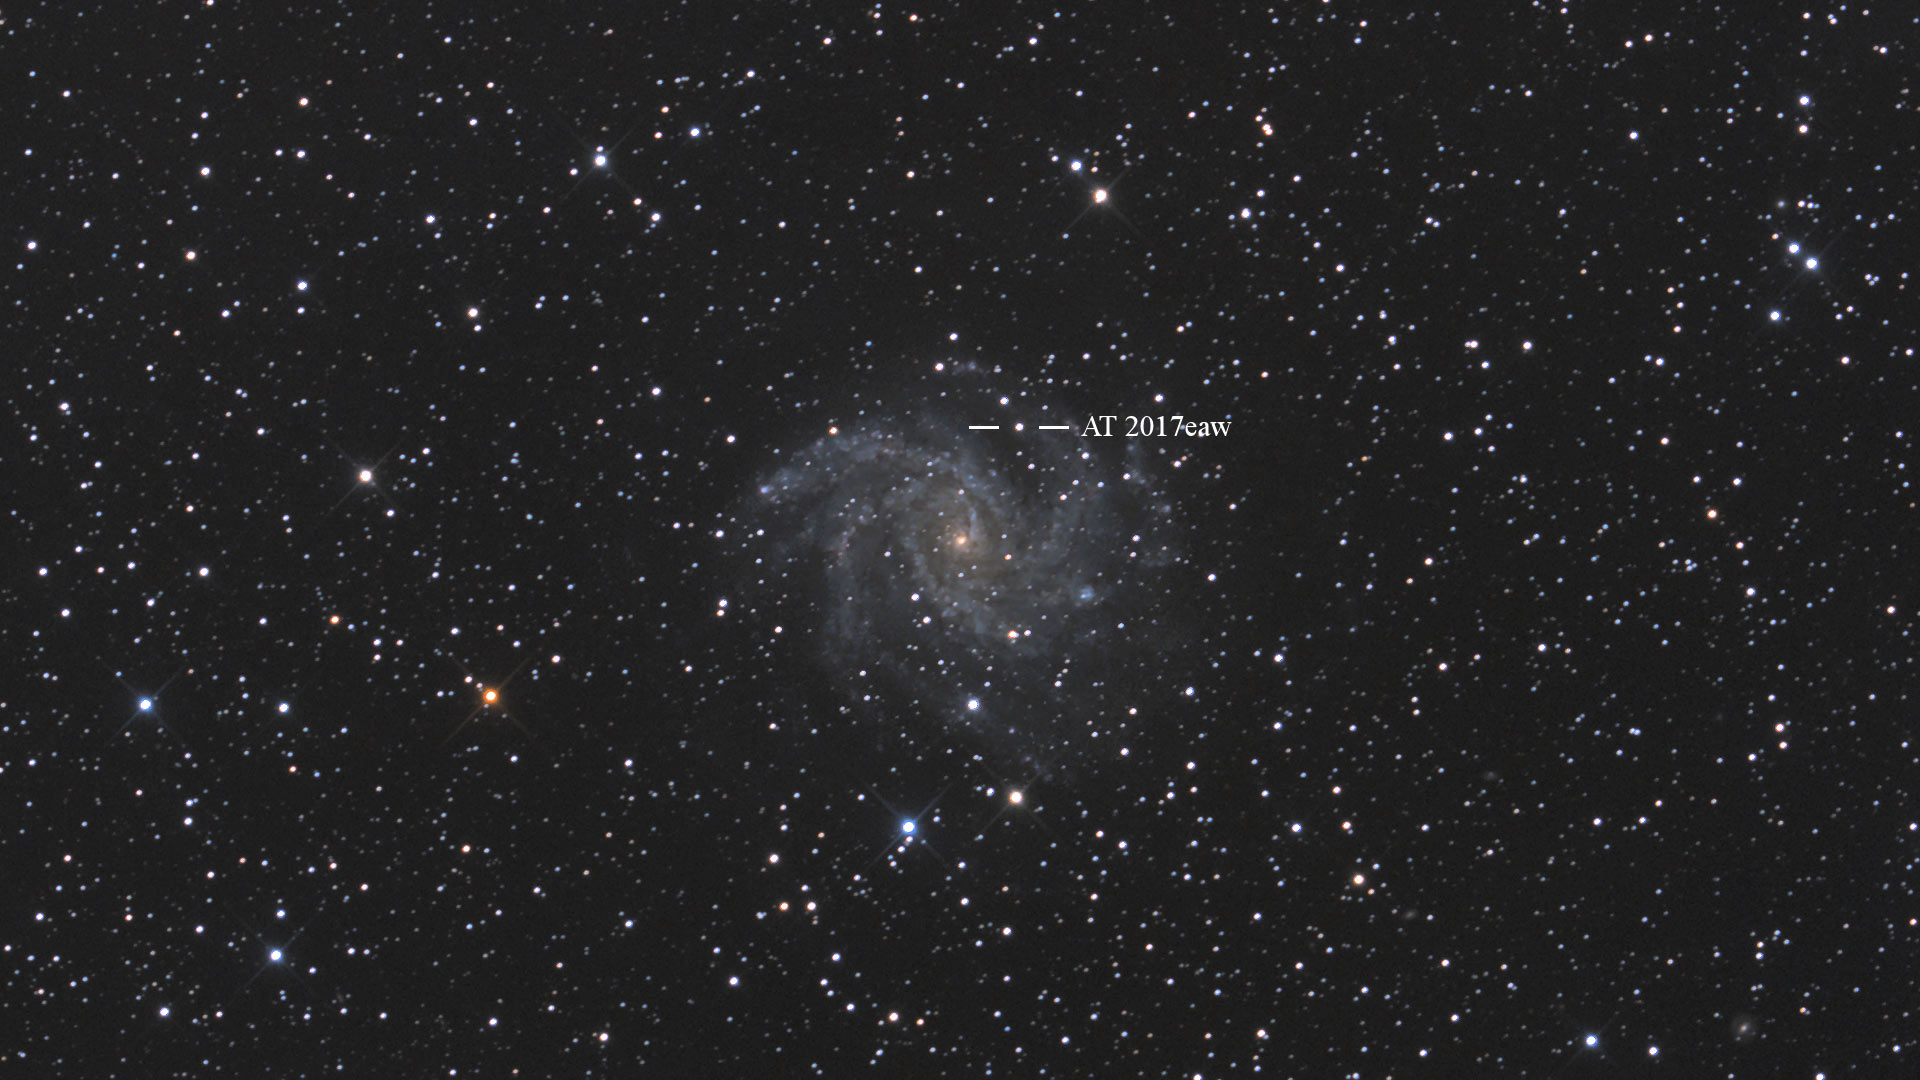 Supernova AT 2017aew in NGC6946